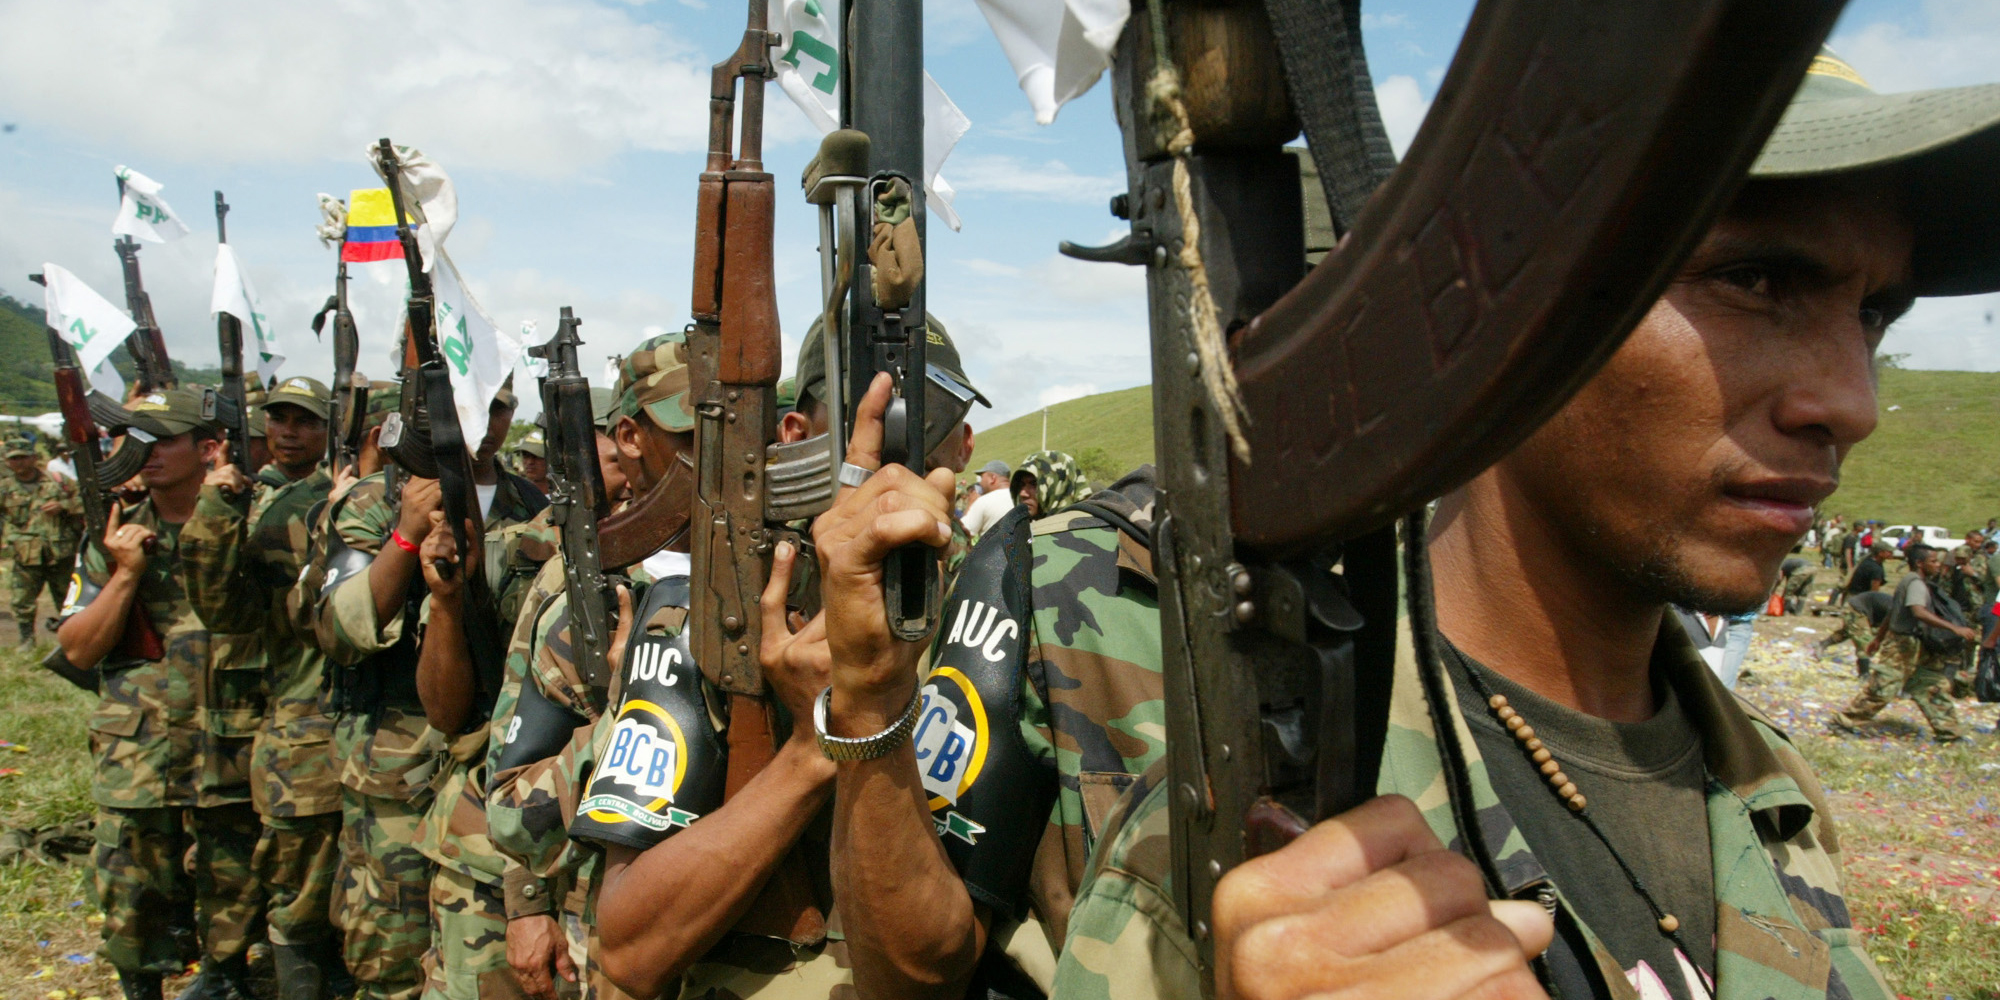 Paramilitary fighters hold their rifles during a ceremony to lay down their arms in Otu, northwest Colombia, Monday, Dec.12, 2005. More than 2,000 fighters from the Central Bolivar Bloc of the paramilitary United Self-Defense Forces, or AUC, under the command of Carlos Jimenez alias "Macaco" gathered in this remote hamlet to lay down their arms and two helicopter gunships as part of an ongoing disarmament process.(AP Photo/Fernando Vergara)